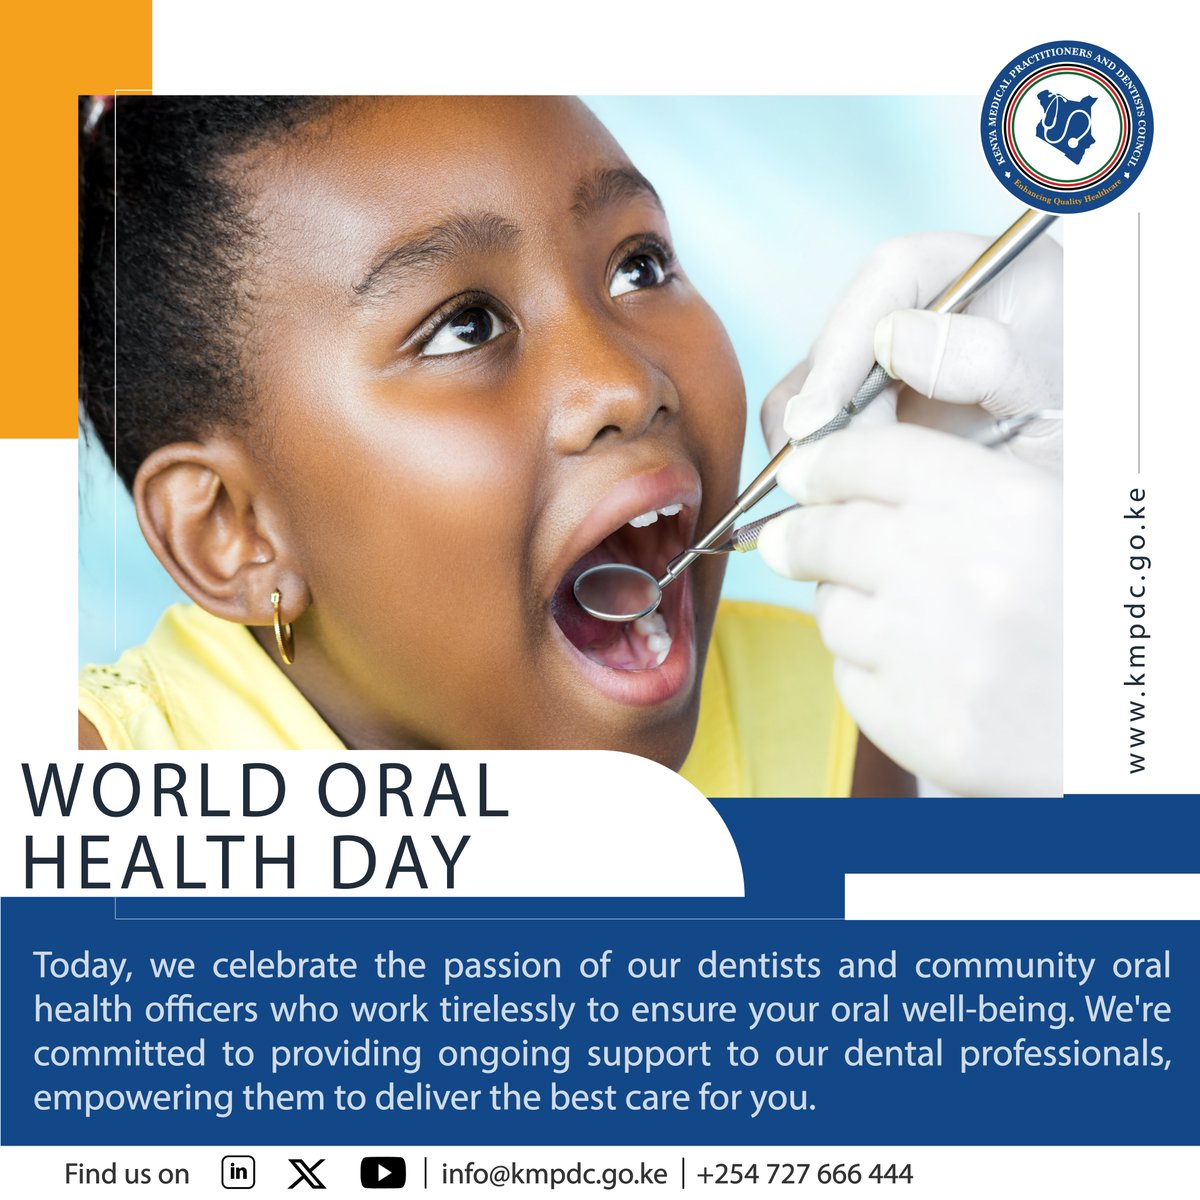 Today, we celebrate the passion of our dentists and community oral health officers who work tirelessly to ensure your oral well-being. We're committed to providing ongoing support to our dental professionals, empowering them to deliver the best care for you. #WorldOralHealthDay